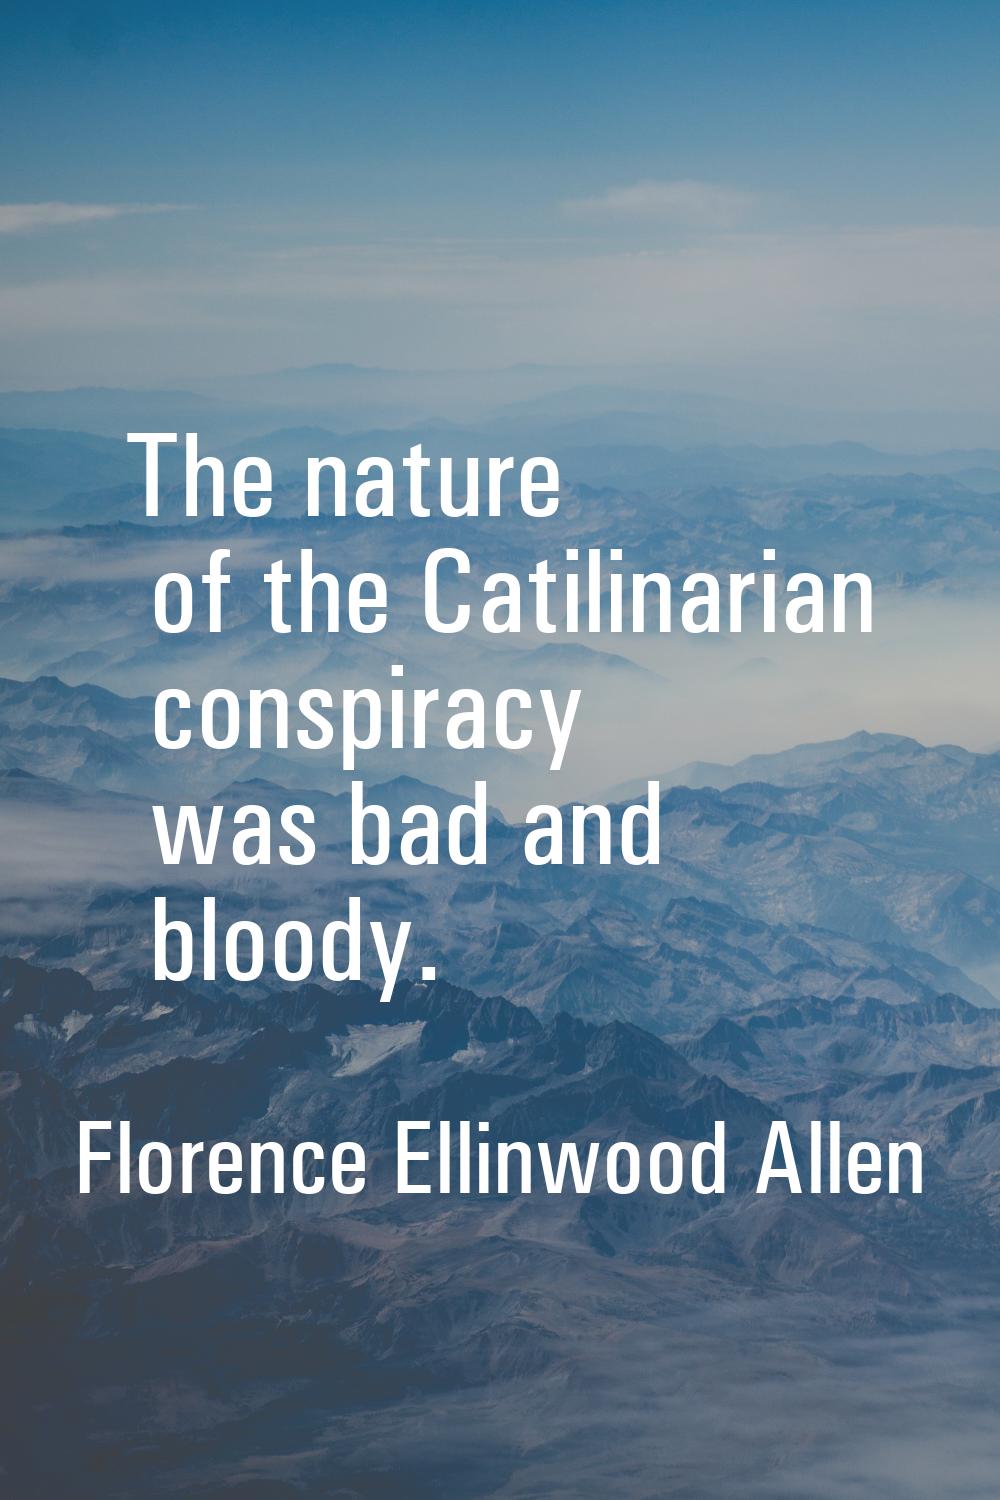 The nature of the Catilinarian conspiracy was bad and bloody.